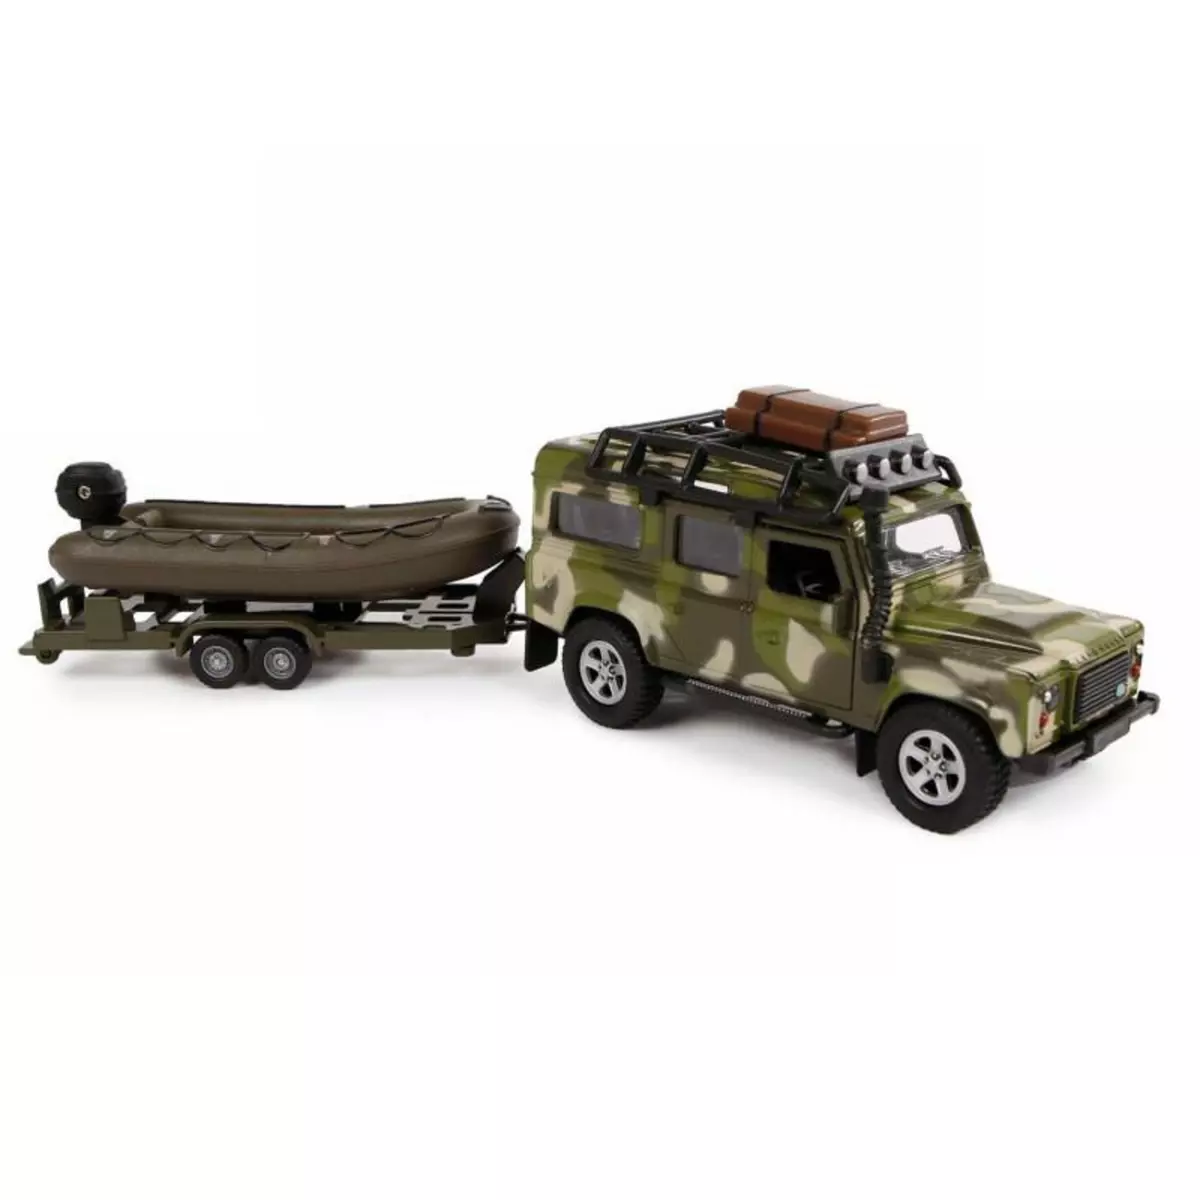 GLOB KIDS Kids Globe Die-cast Land Rover with Trailer and Army Boat